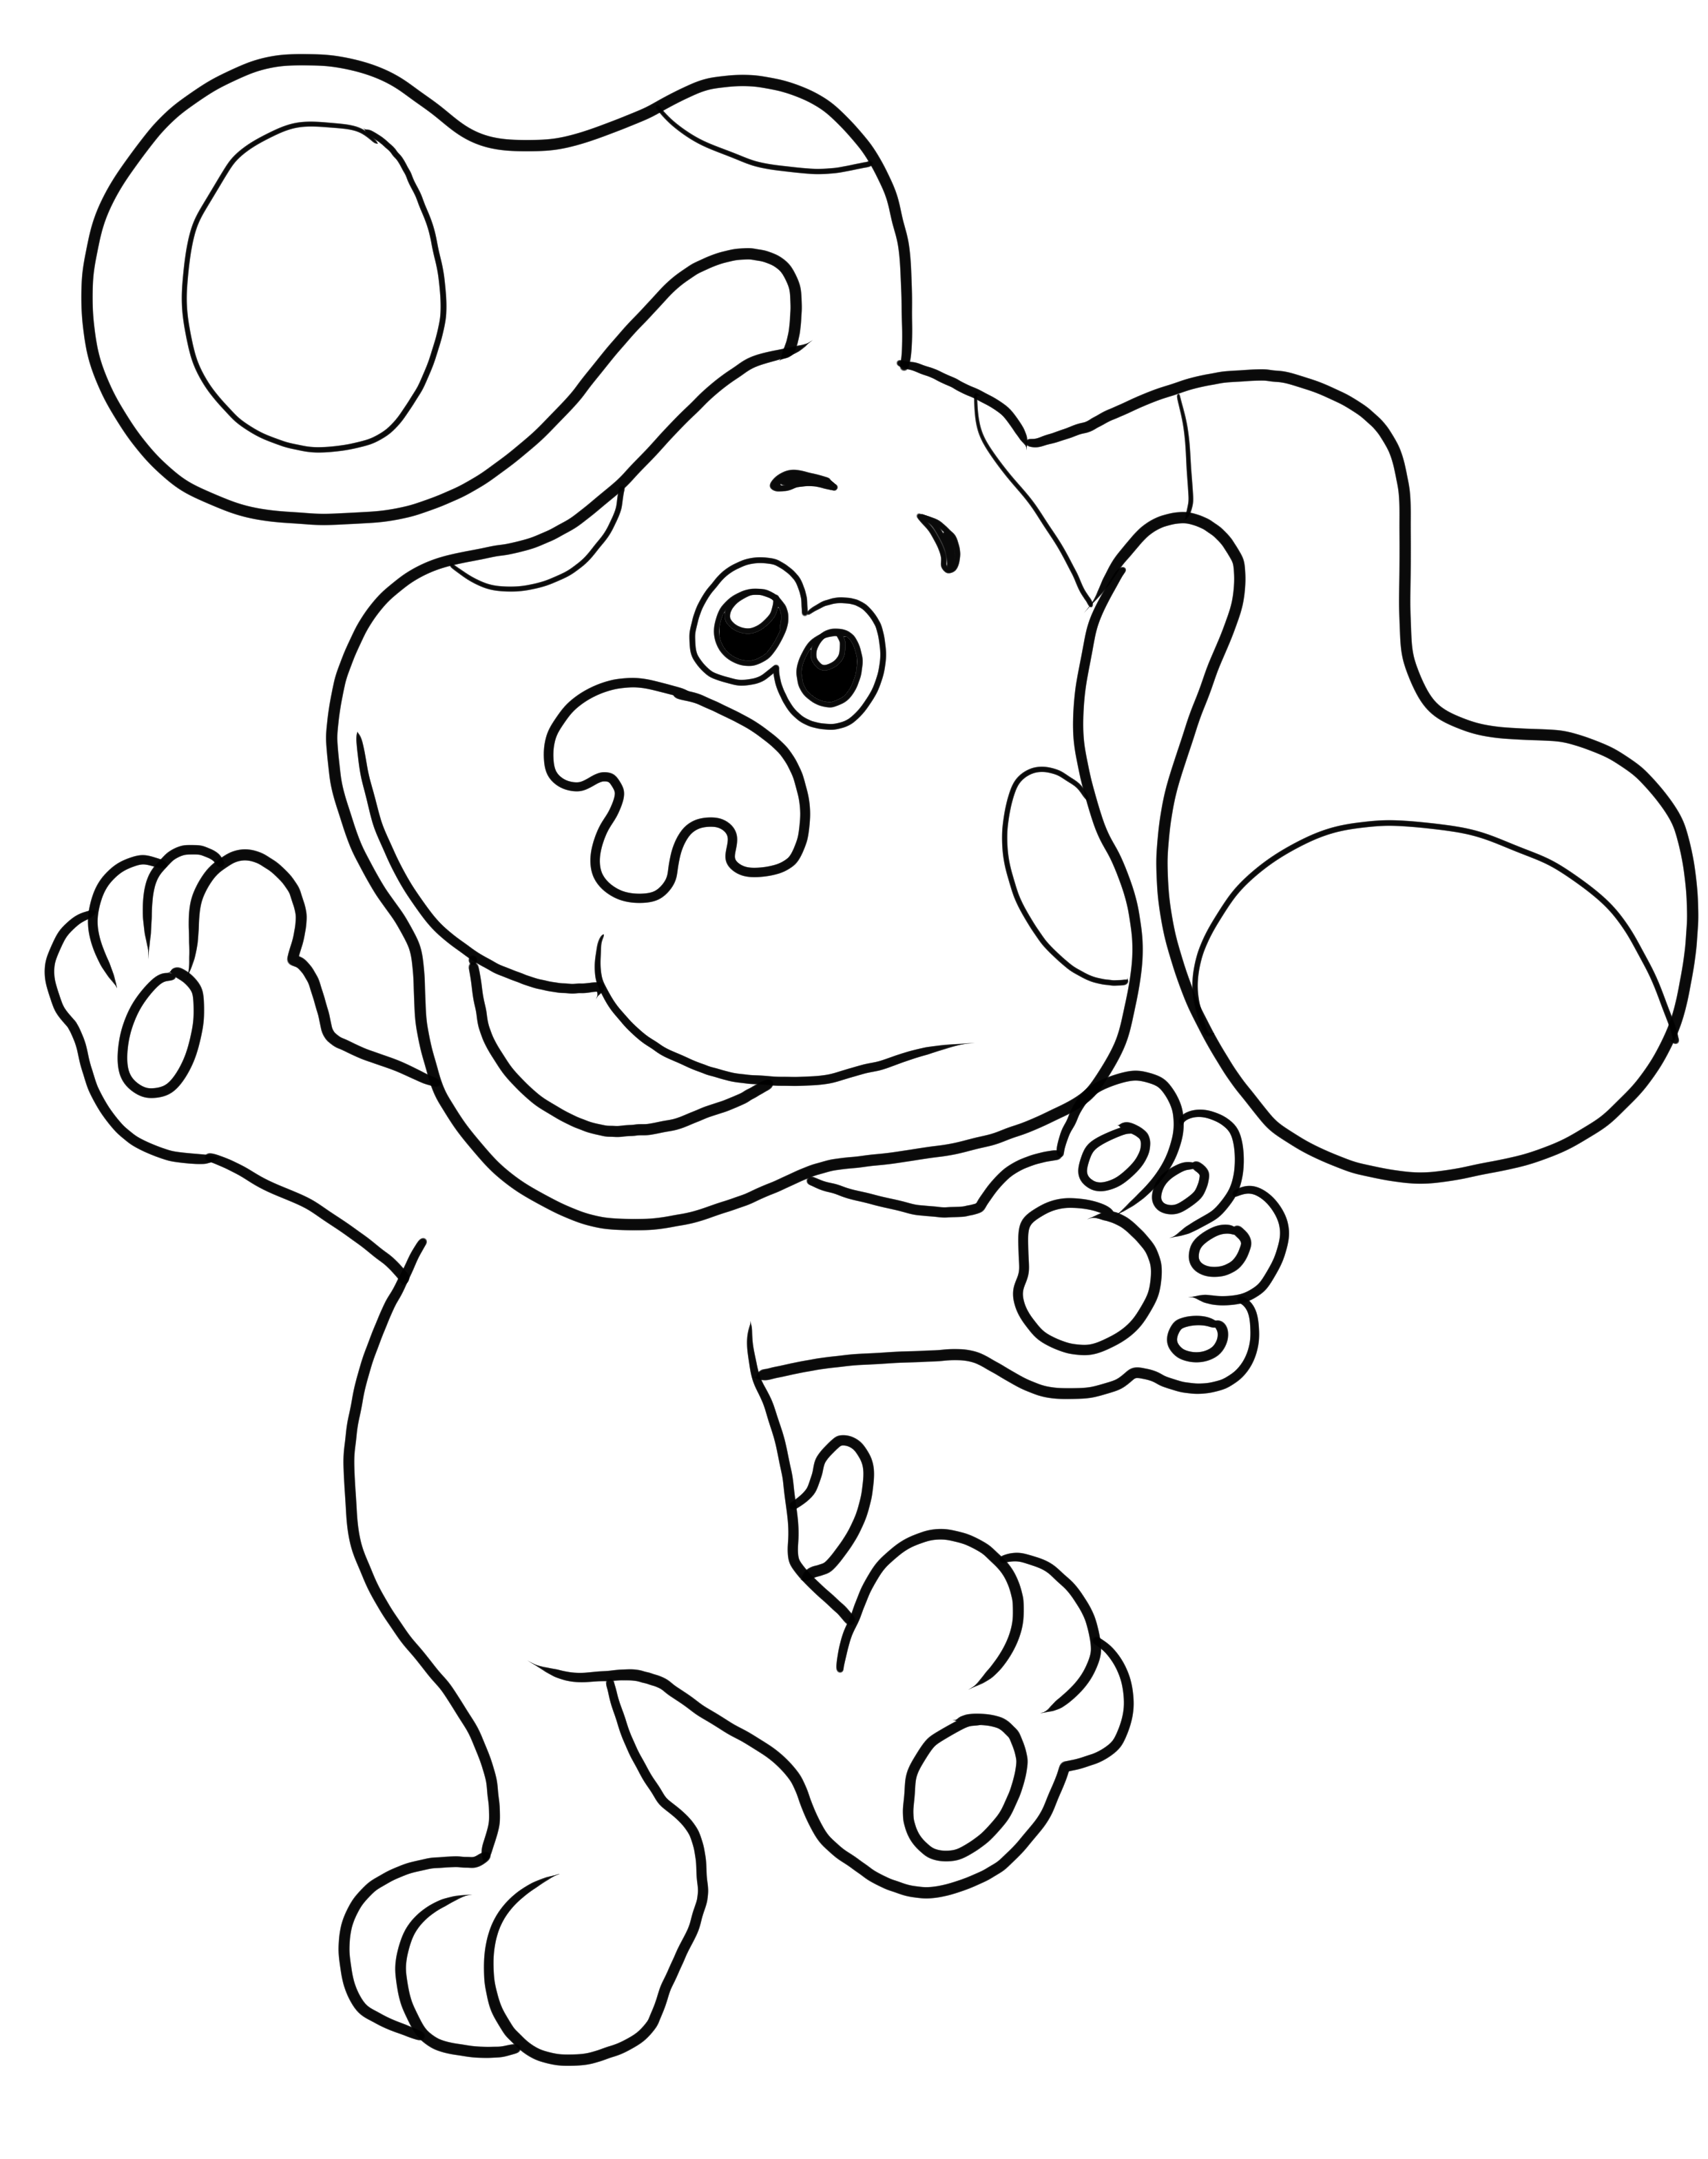 Blue's Clues 02 from Blue's Clues coloring page to print and coloring